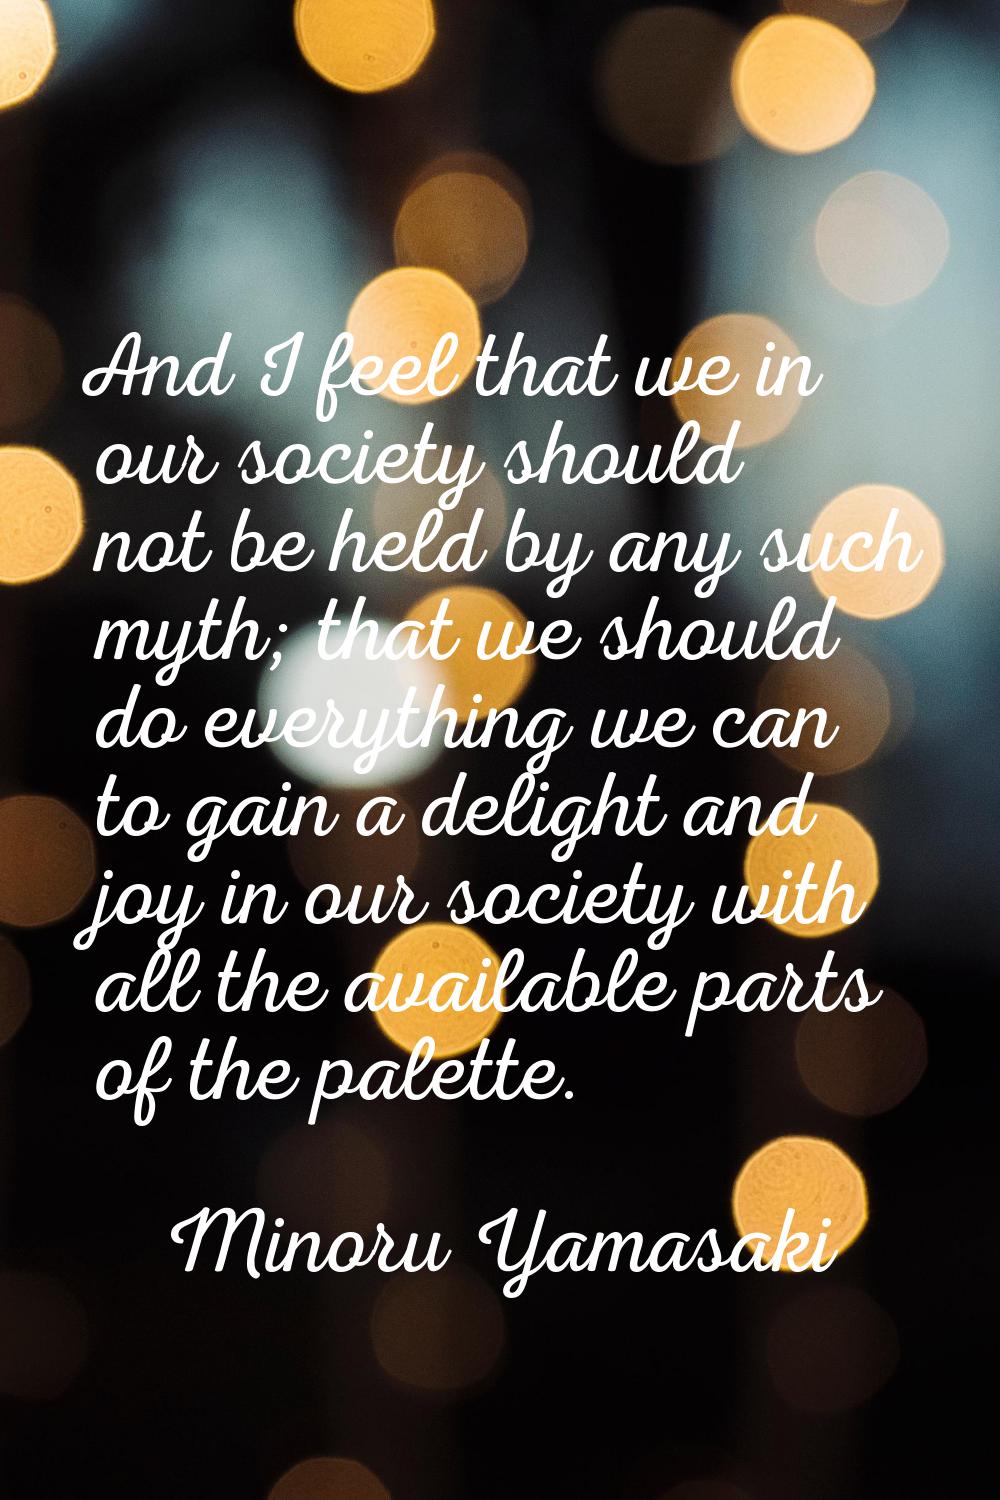 And I feel that we in our society should not be held by any such myth; that we should do everything